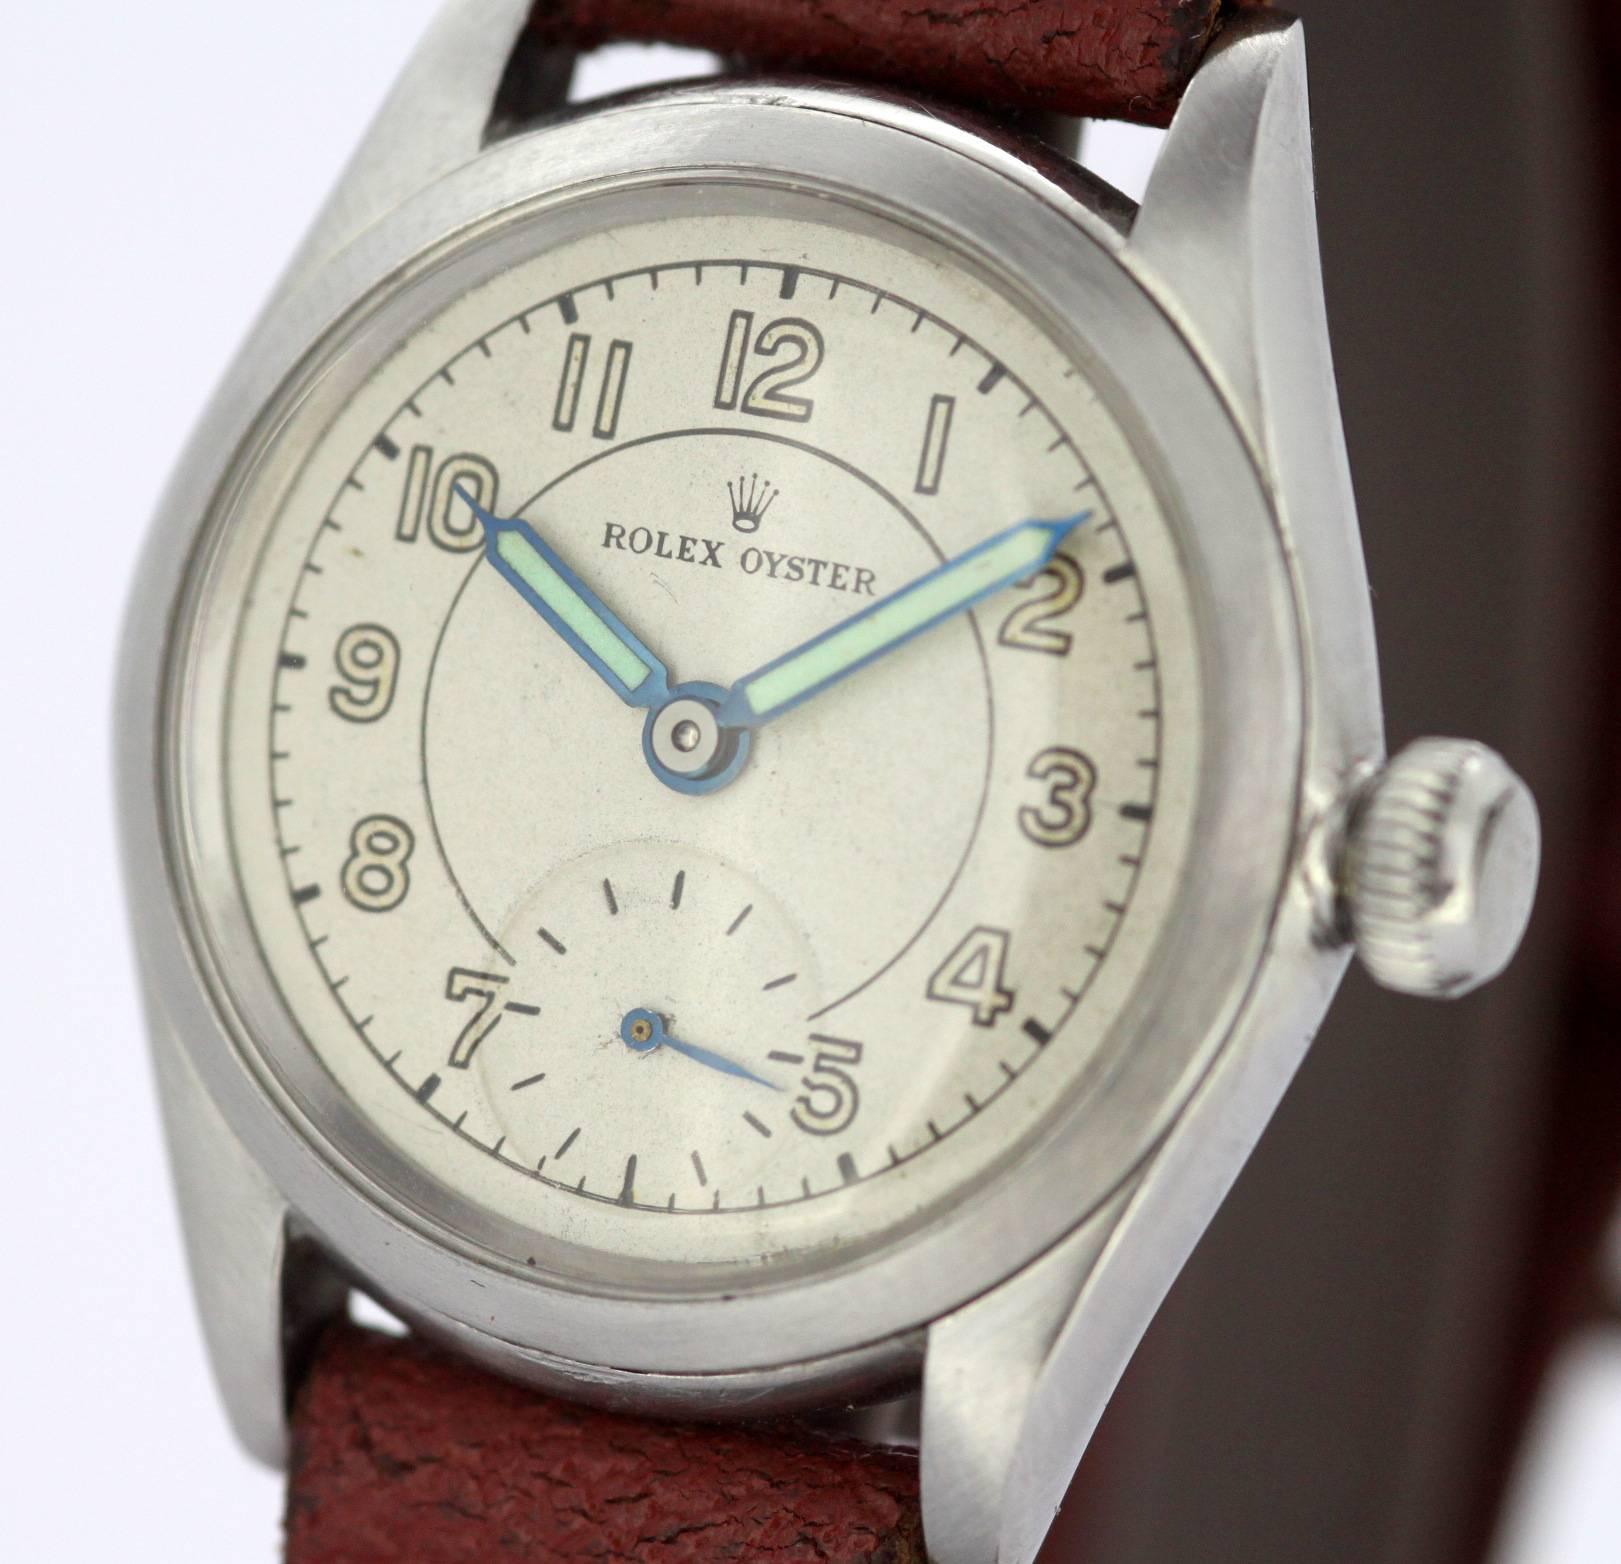 Rolex Oyster, Vintage manual winding wristwatch. 1930's 

Case : Stainless Steel Original Rolex 
Gender:	Men's 
Case size (including crown): 35 x 33 mm 
Movement: Swiss Manual wind 
Watch band material: Genuine Leather Strap 
Lens: Plexiglass